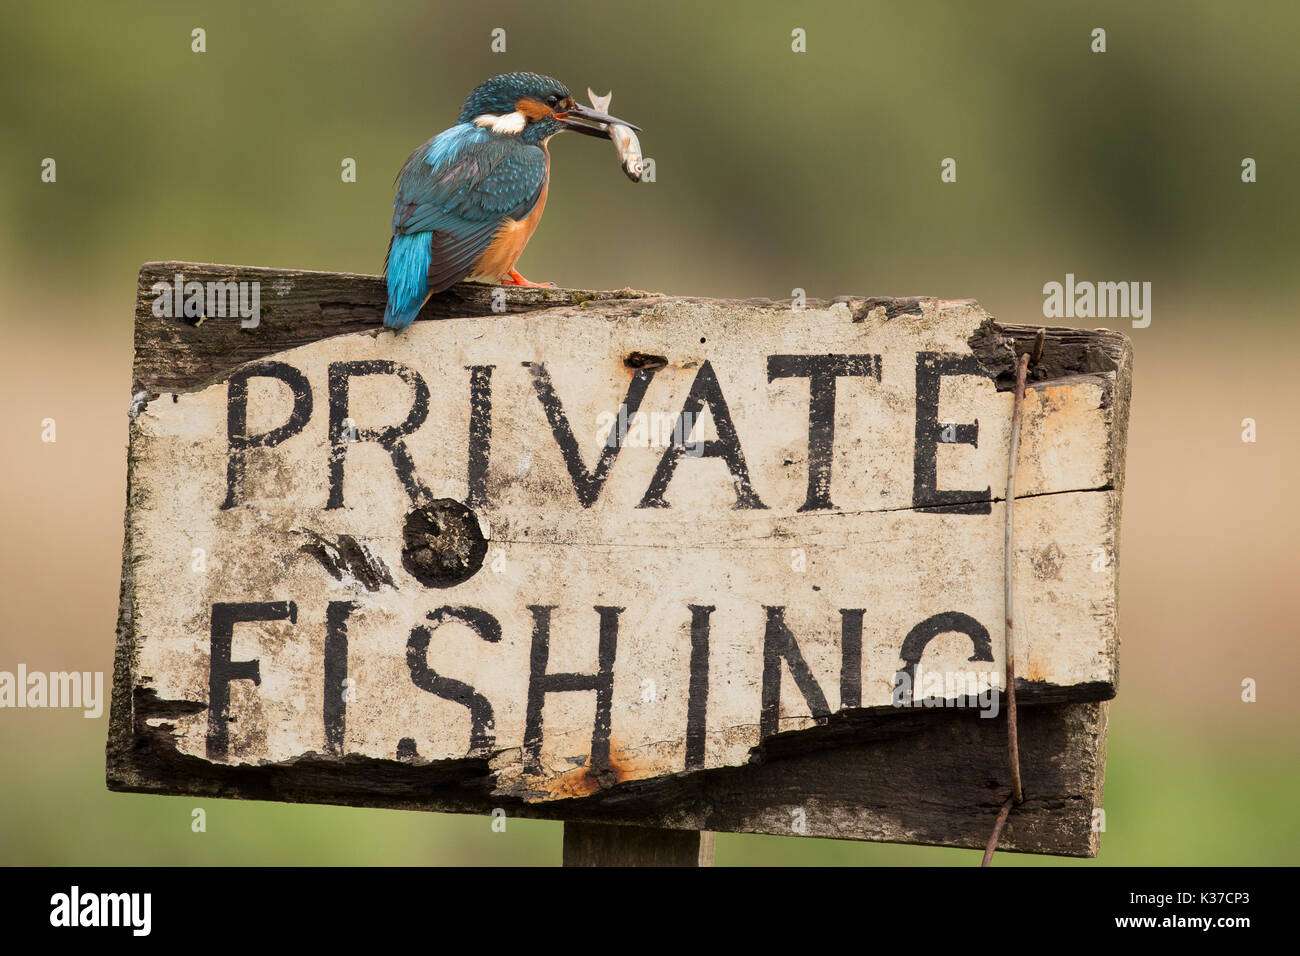 Male Kingfisher cheekily perched on a Private Fishing sign, while eating a fish. Stock Photo